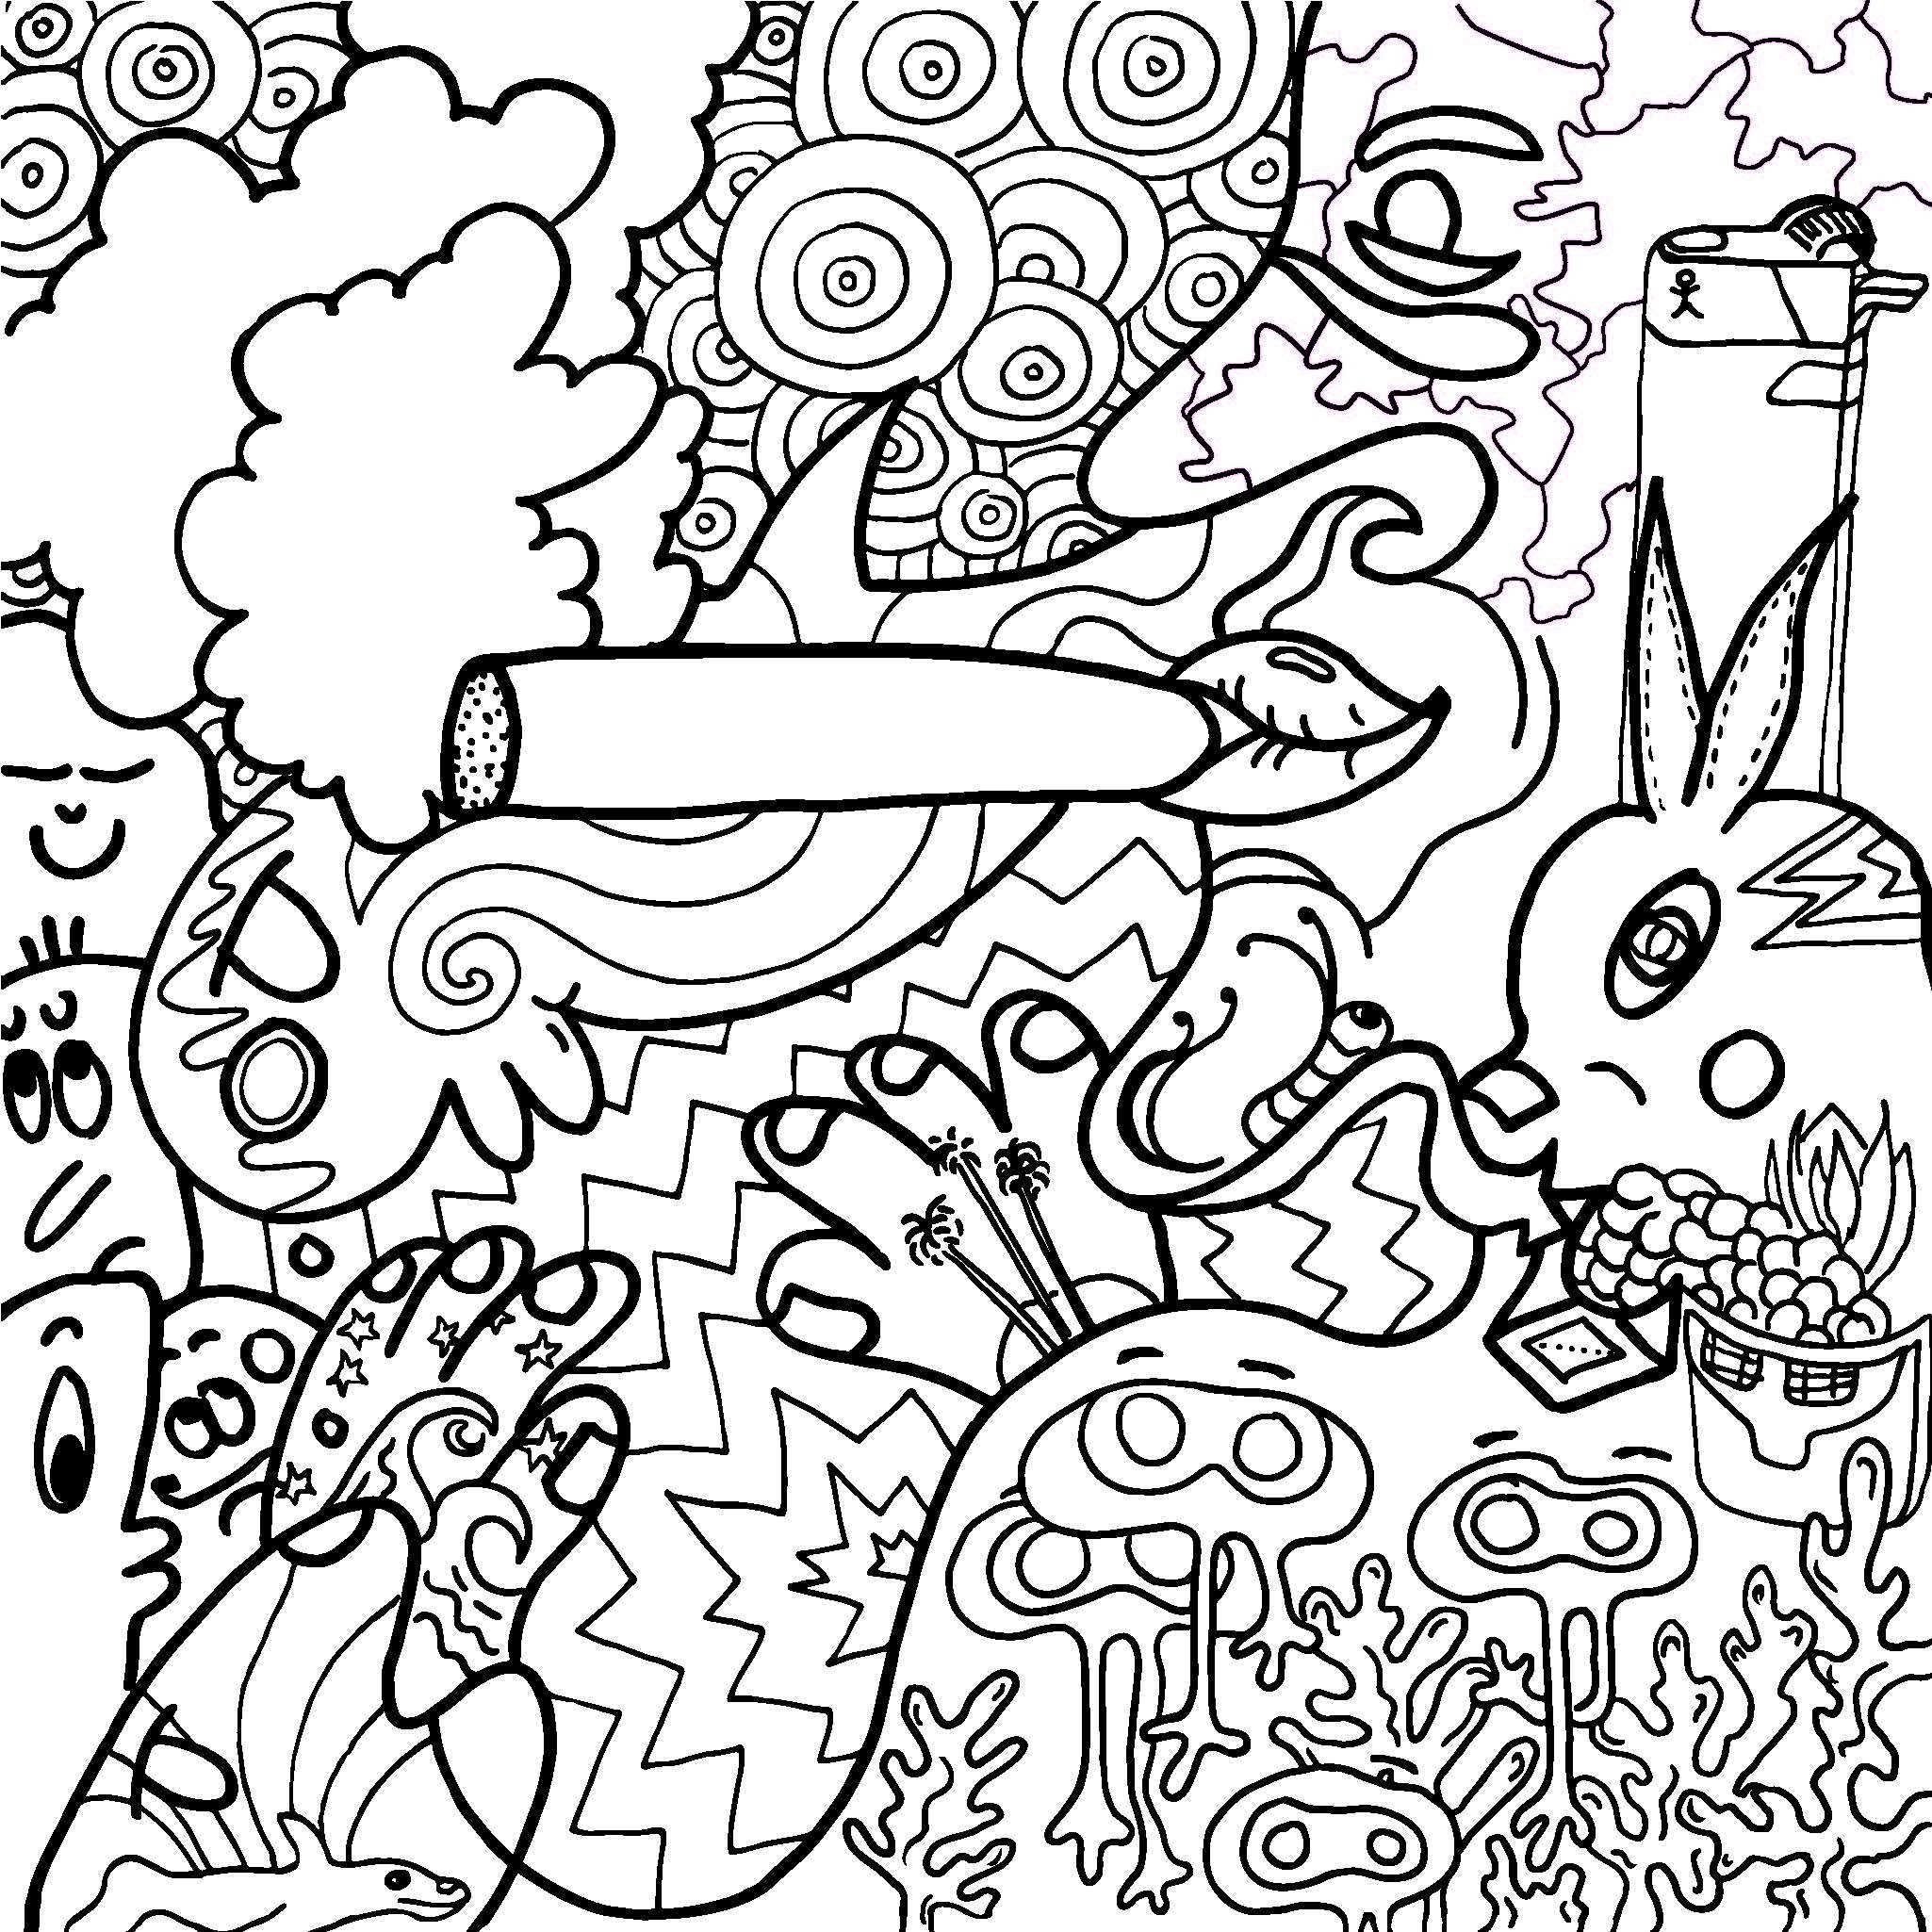 The Stoner's Coloring Book Coloring For High Minded Adults Hoffman